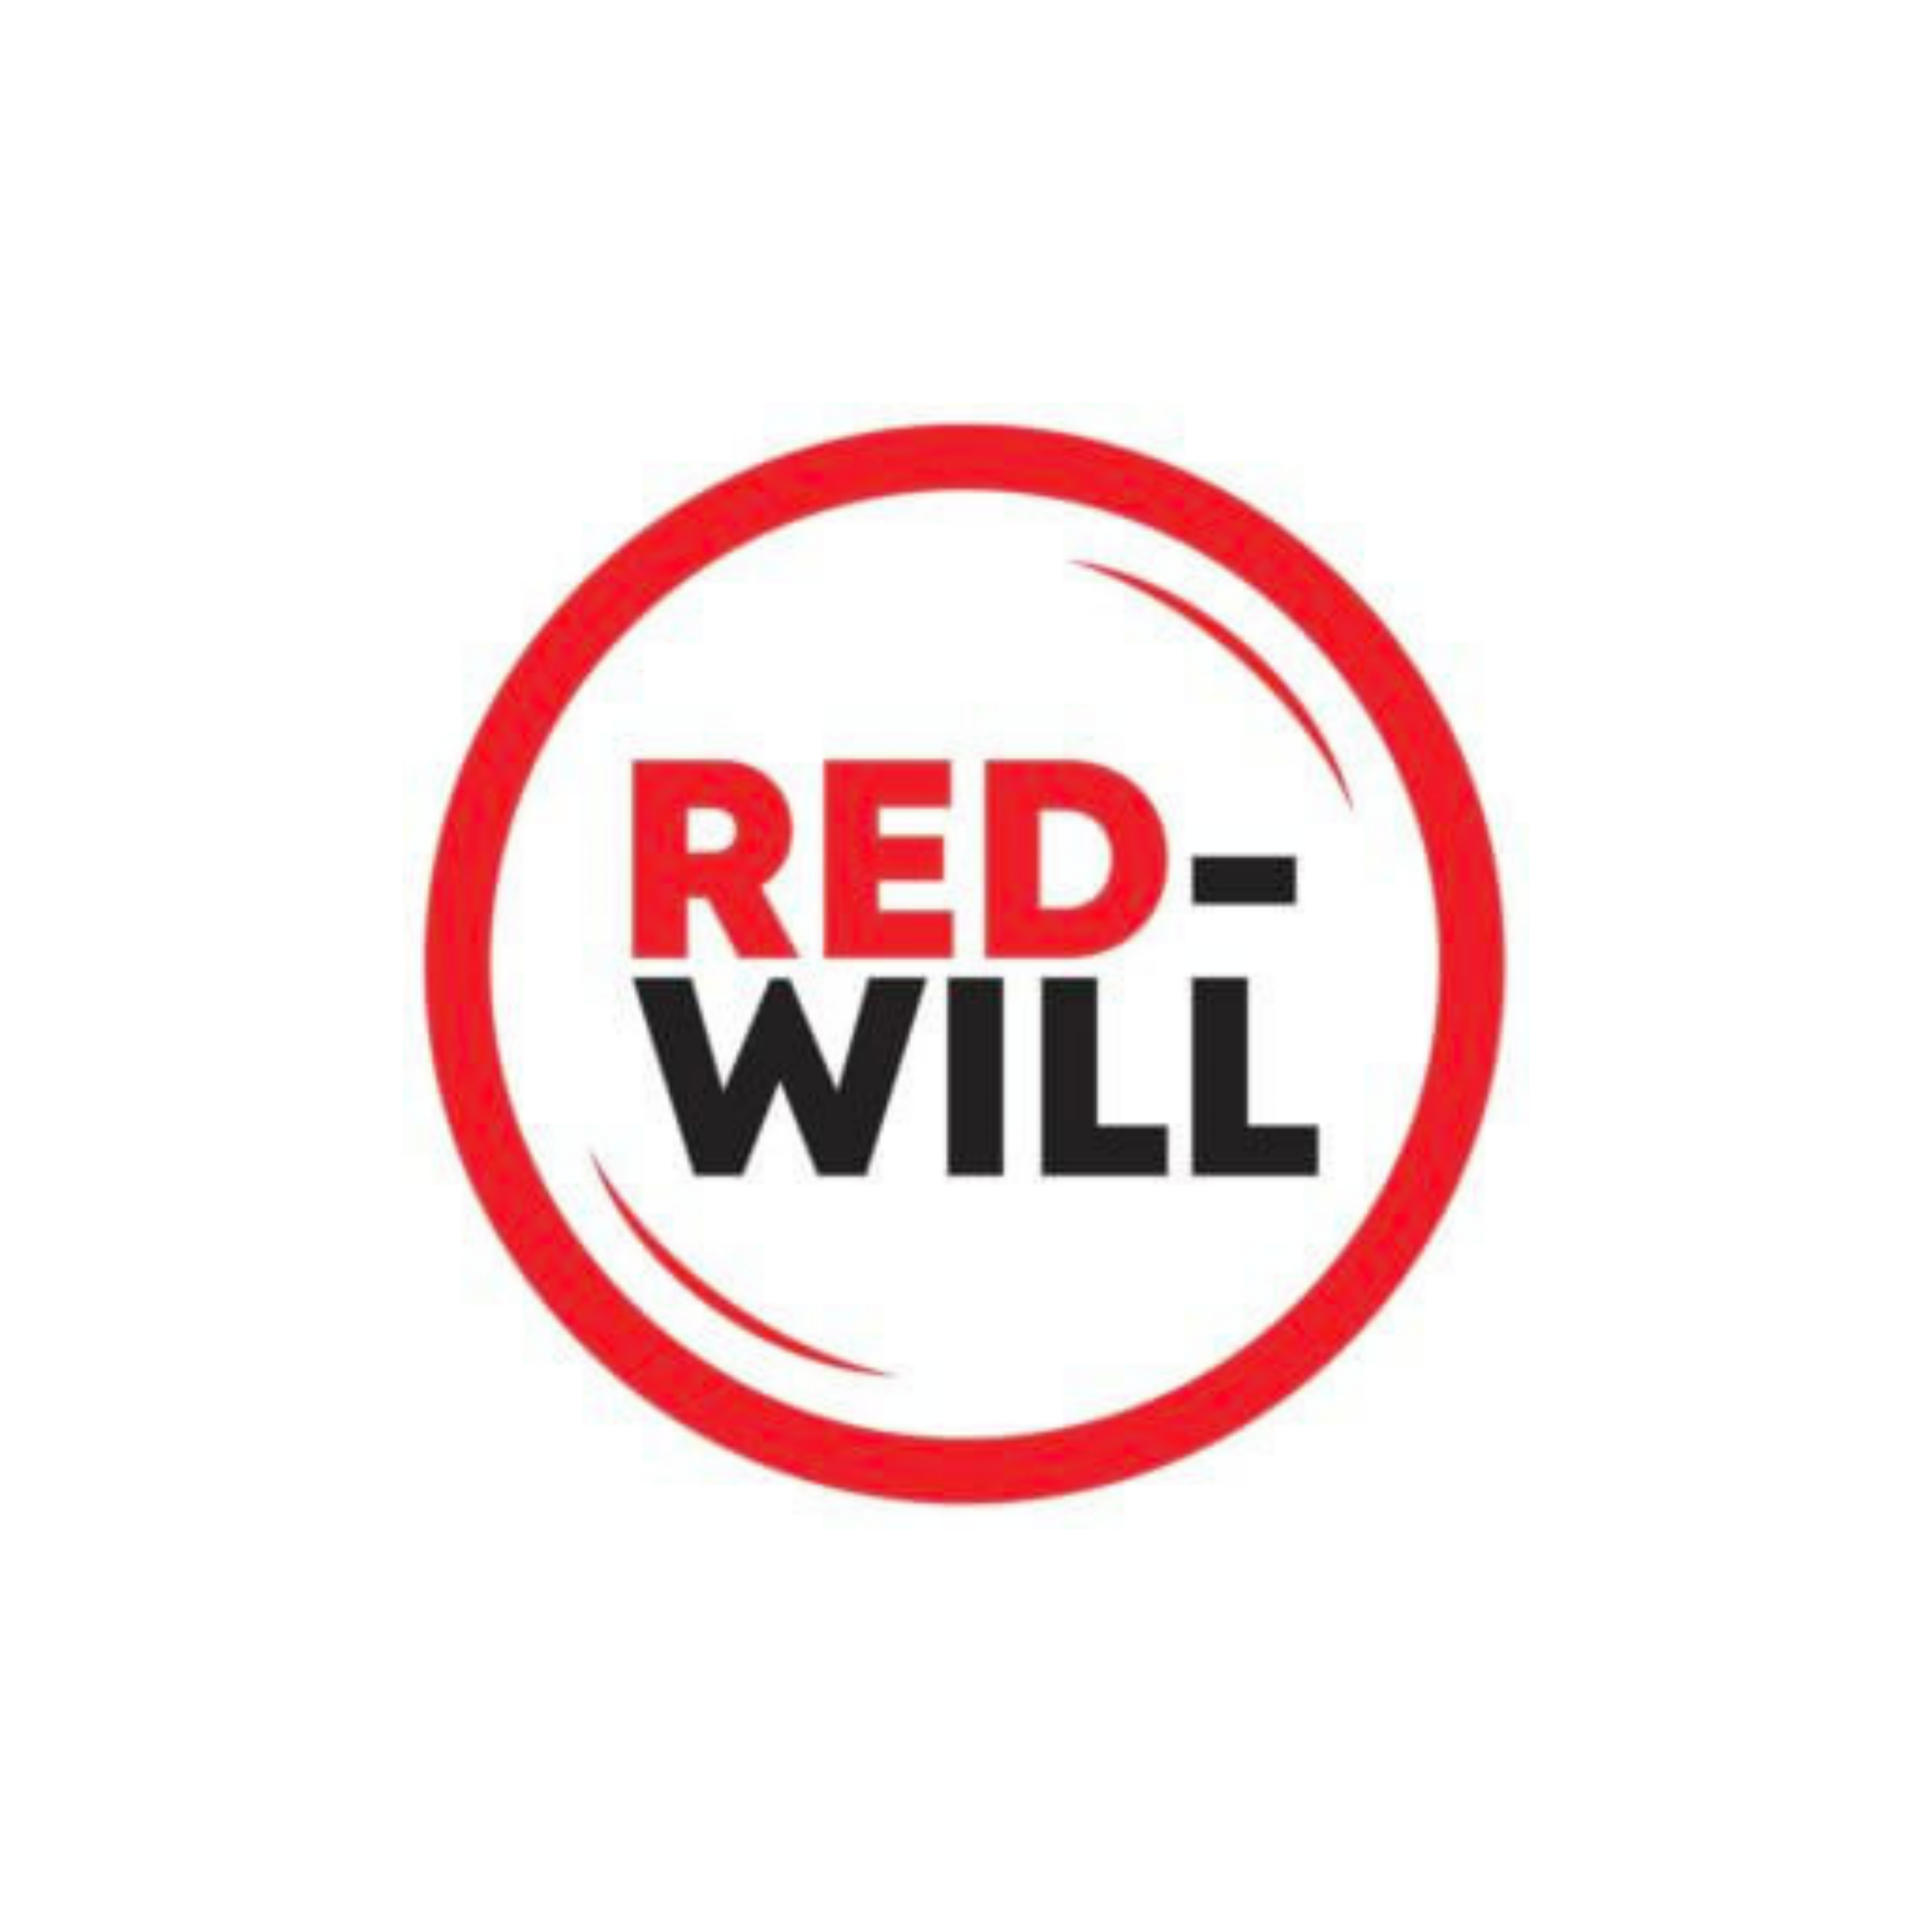 Red-will logo png